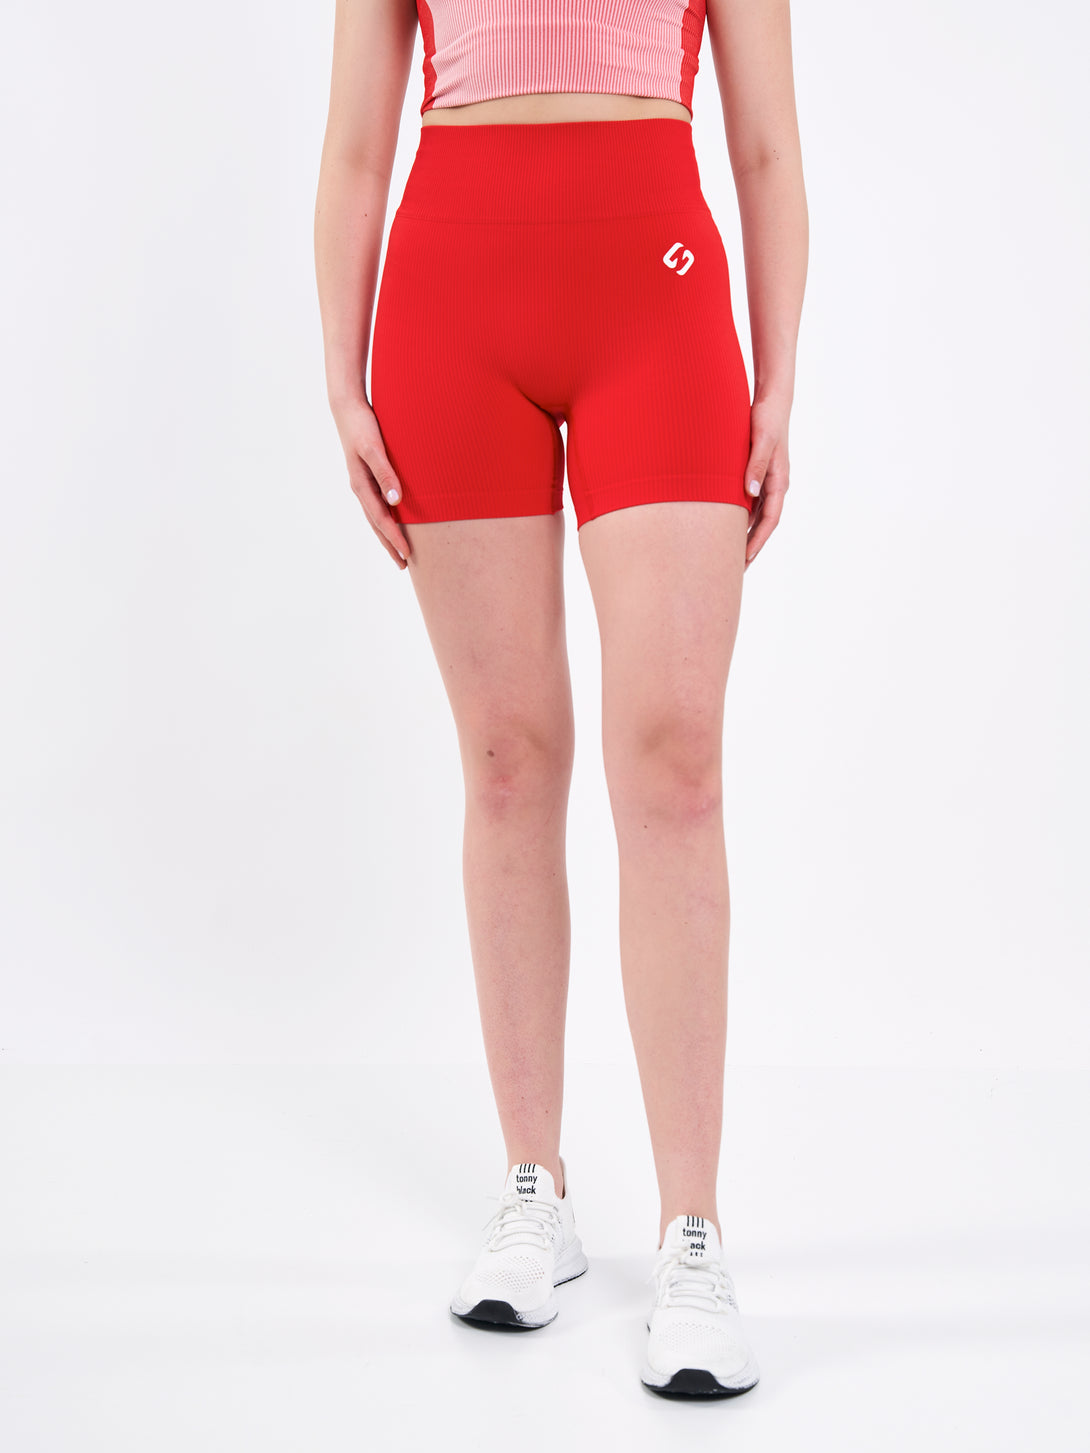 A Woman Wearing Bright Red Color Easy-Move Seamless Ribbed Crop Top for All-Day Wear